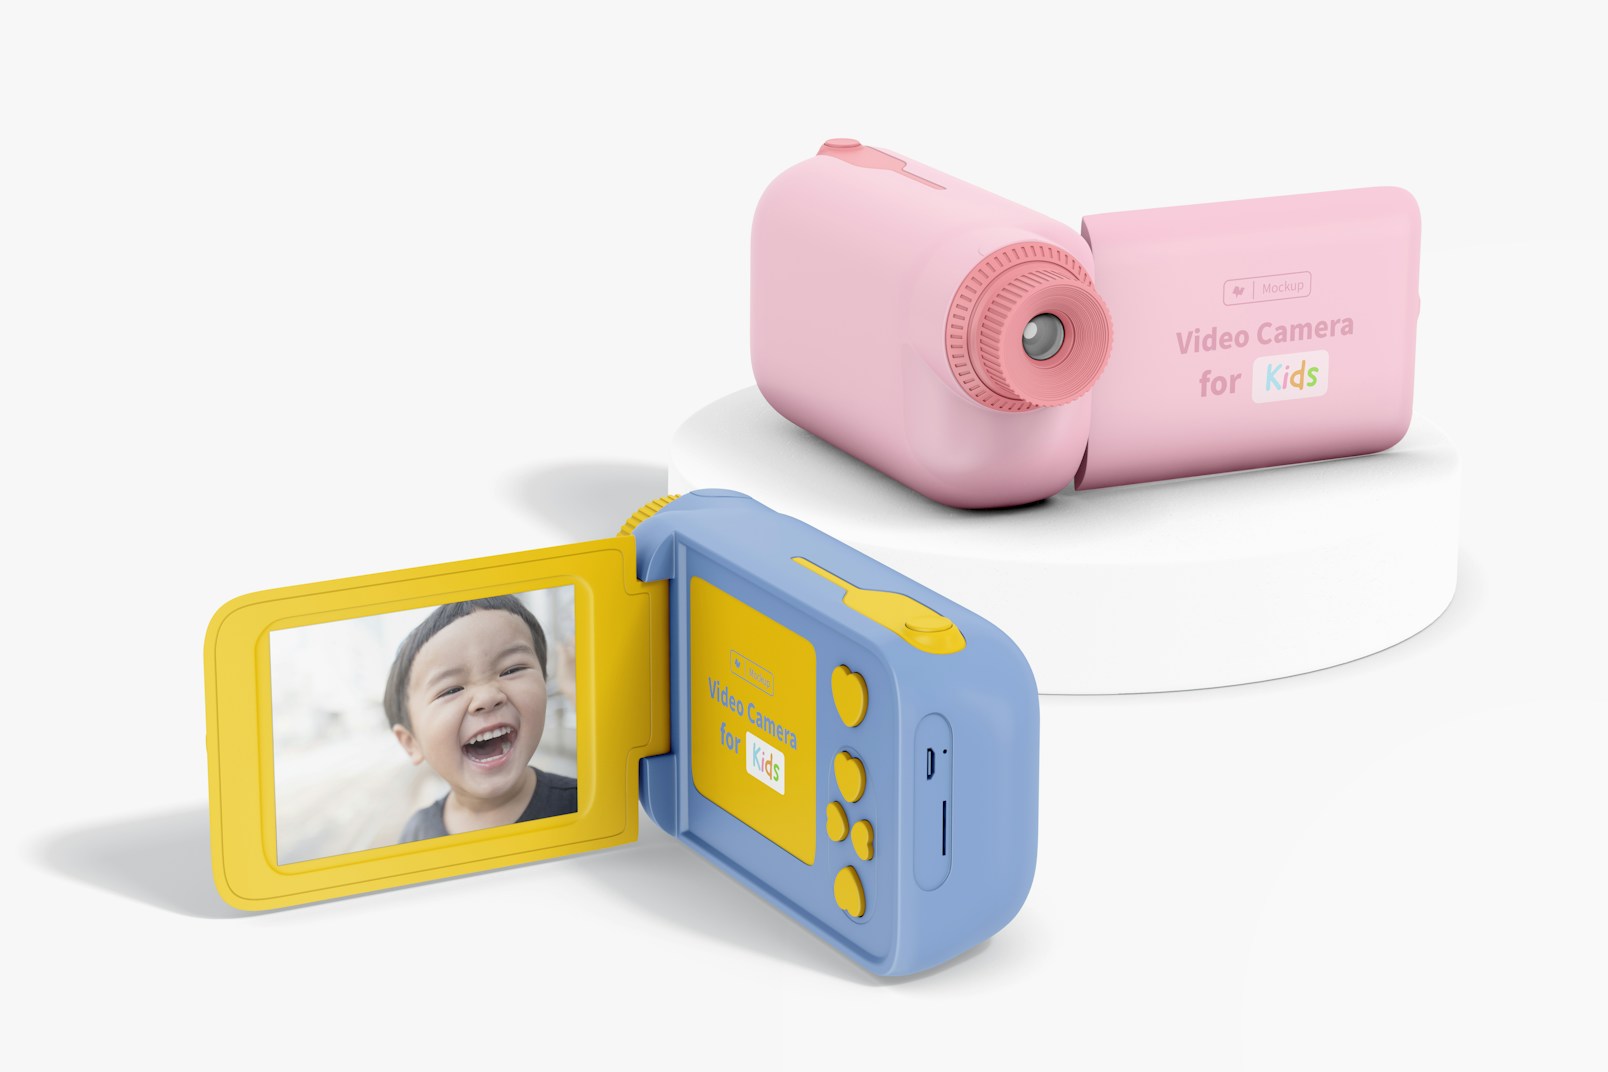 Video Cameras for Kids Mockup, Front View